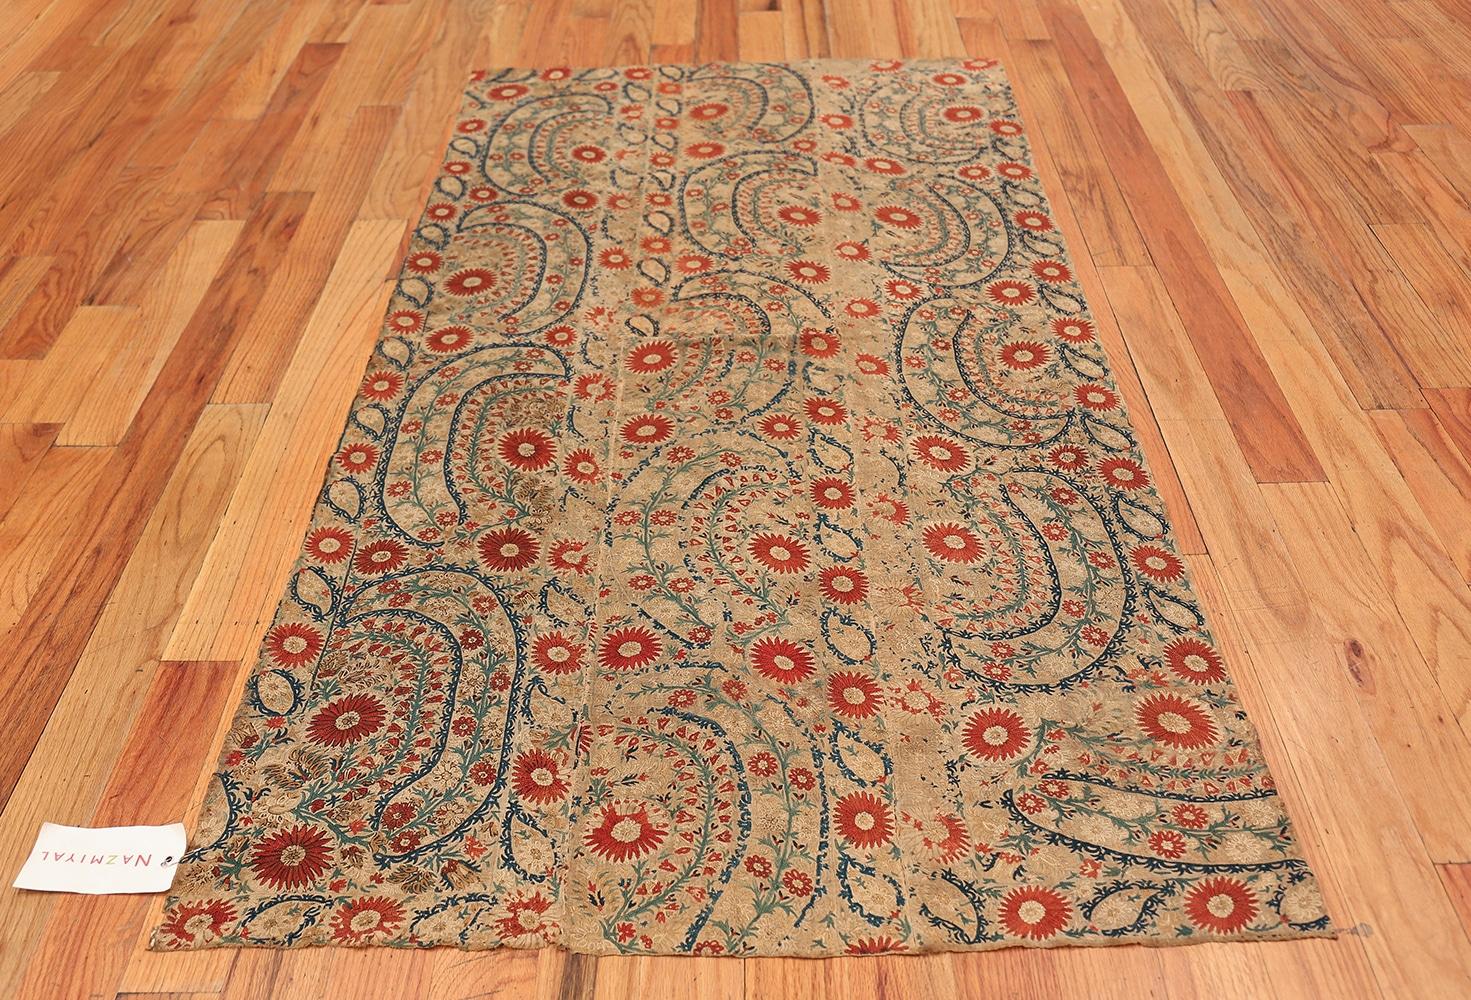 Hand-Woven Refined Yet Rustic Antique Ottoman Textile Embroidery 3'2